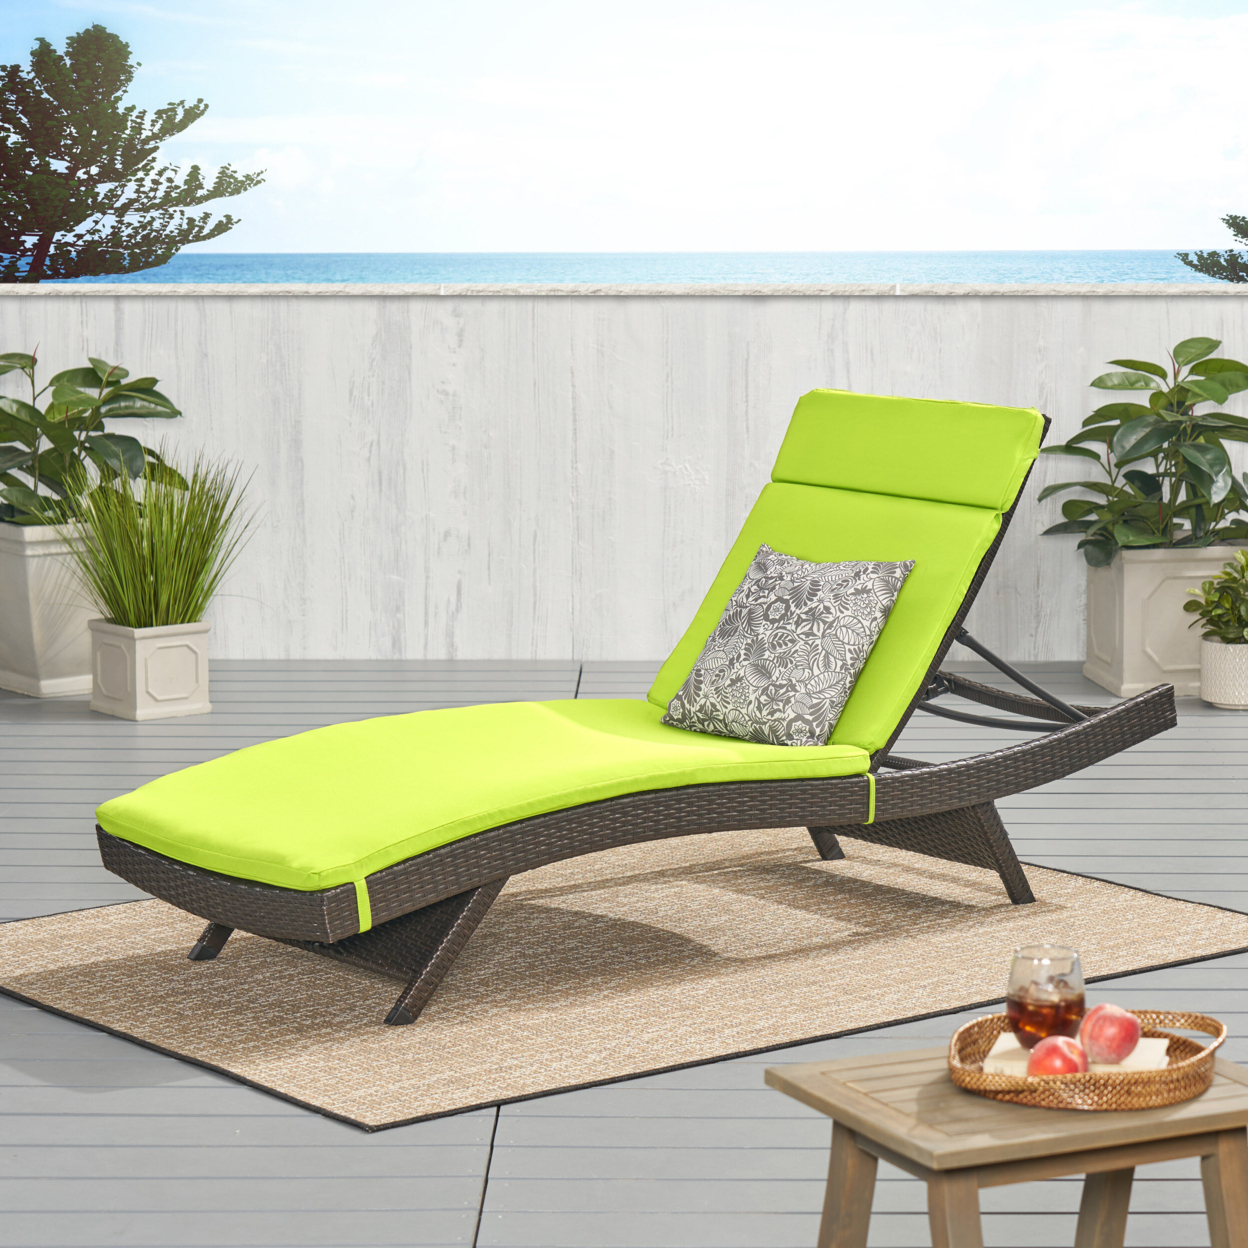 Lakeport Outdoor Adjustable Chaise Lounge Chair With Cushion - Green Cushion